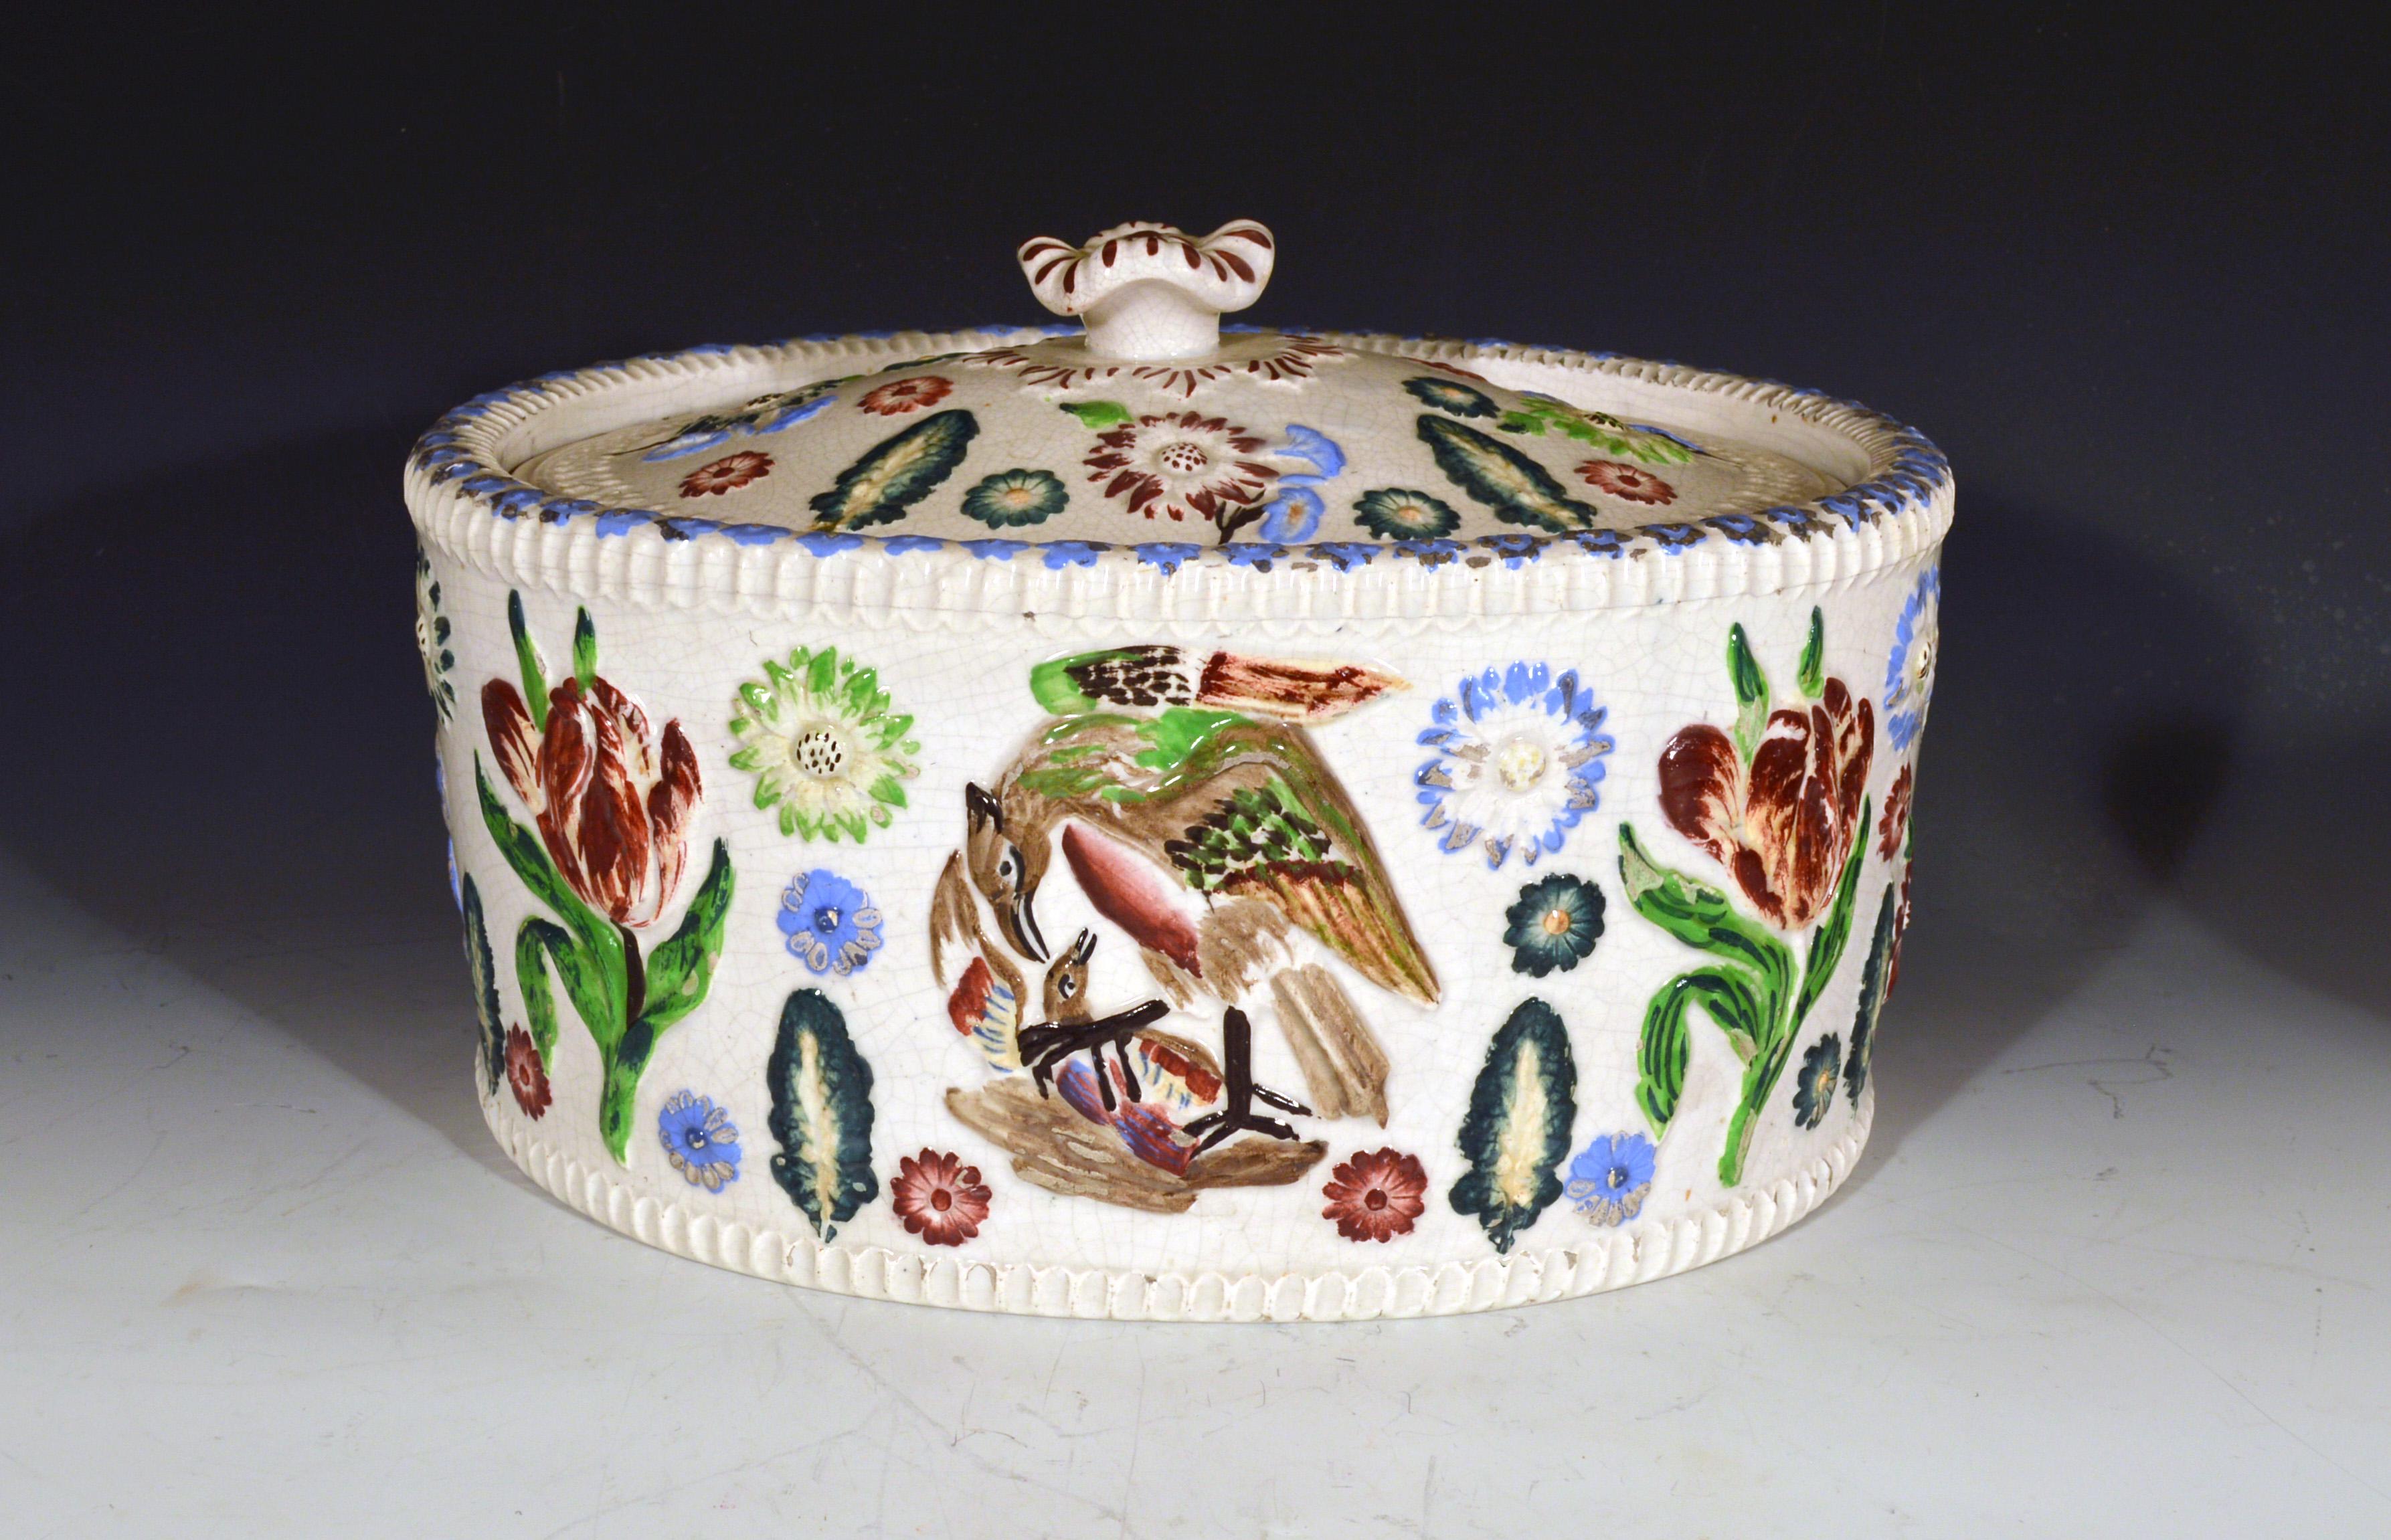 English pottery game tureen,
19th century

The oval game tureen and cover has painted molded mother bird and chick to the center of each side and large molded tulips to each side. Scattered across the body and cover are other molded flowers and